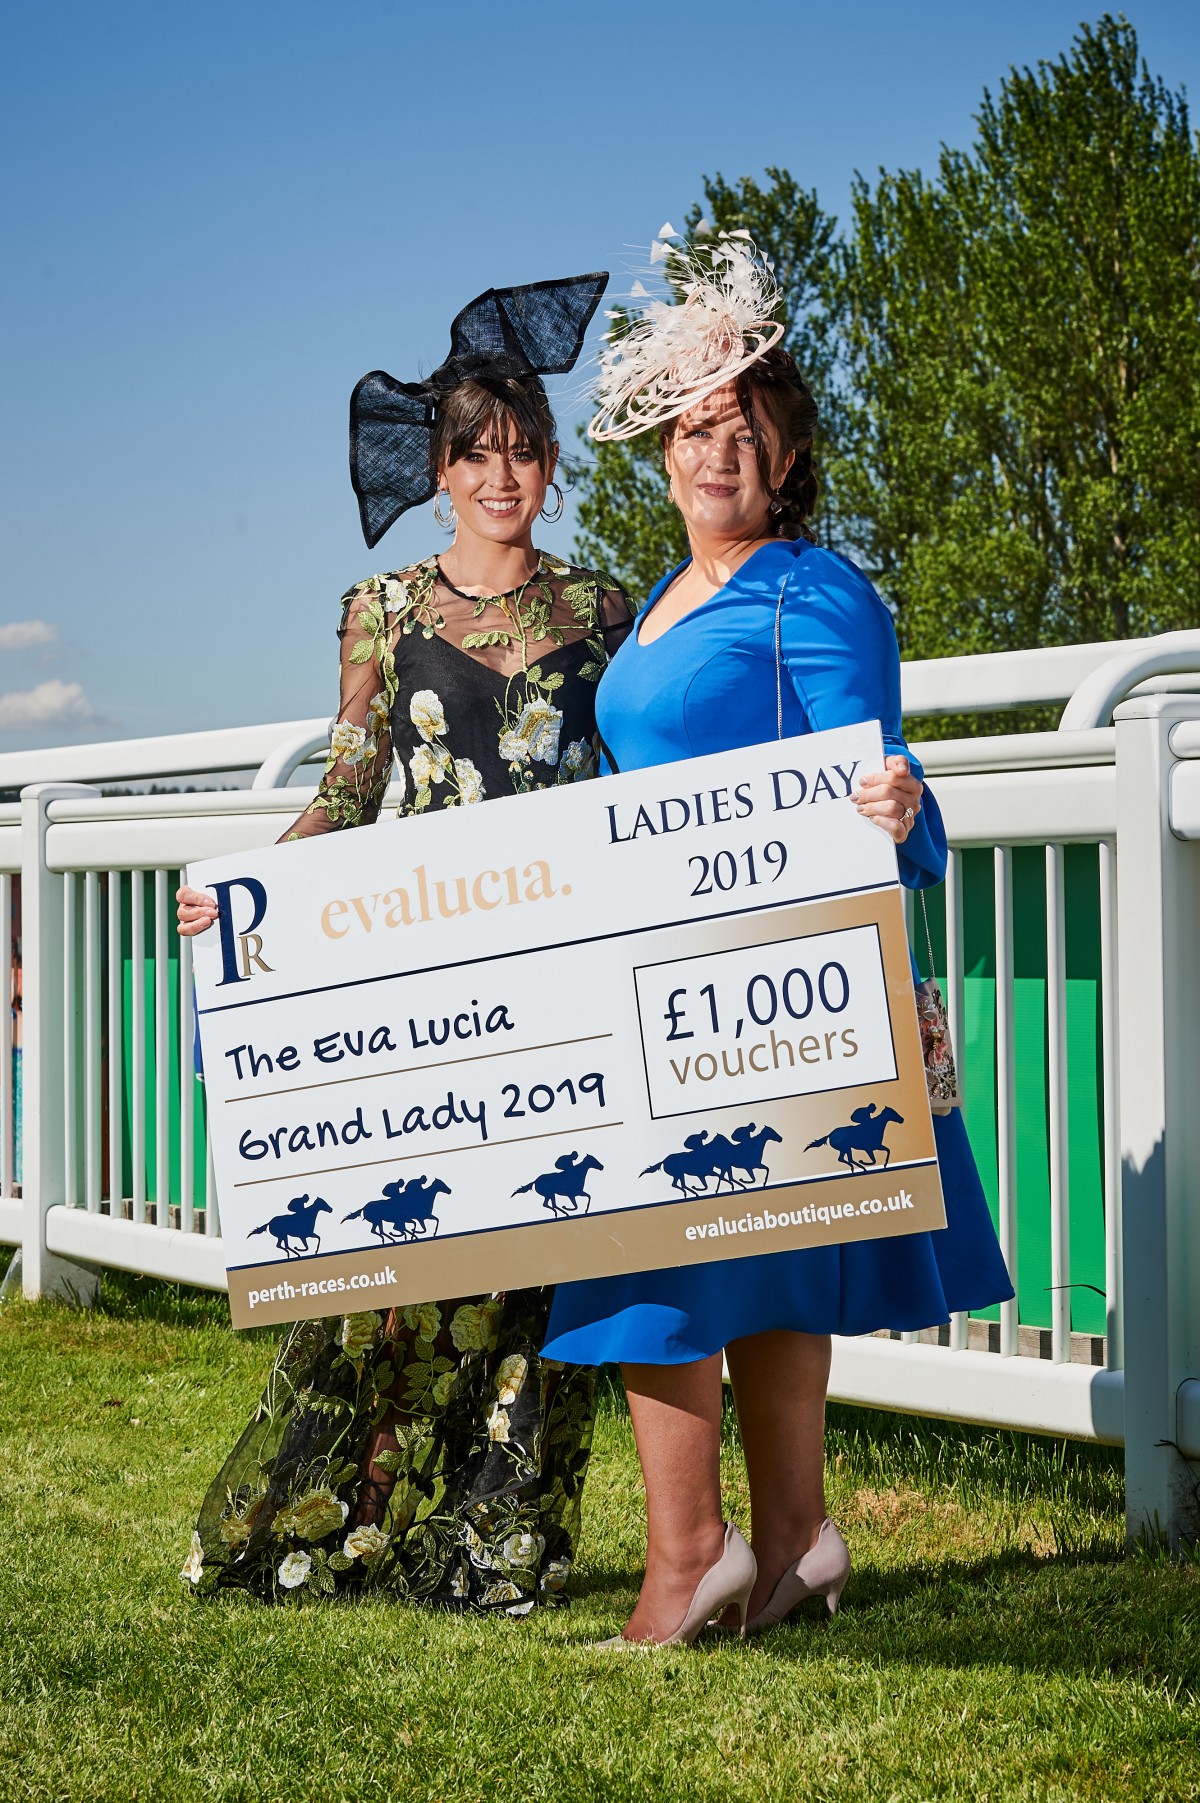 Jennifer Eadie was chosen at the VIP Grand Lady winner and bagged herself £1000 voucher for Eva Luciia - Well deserved!